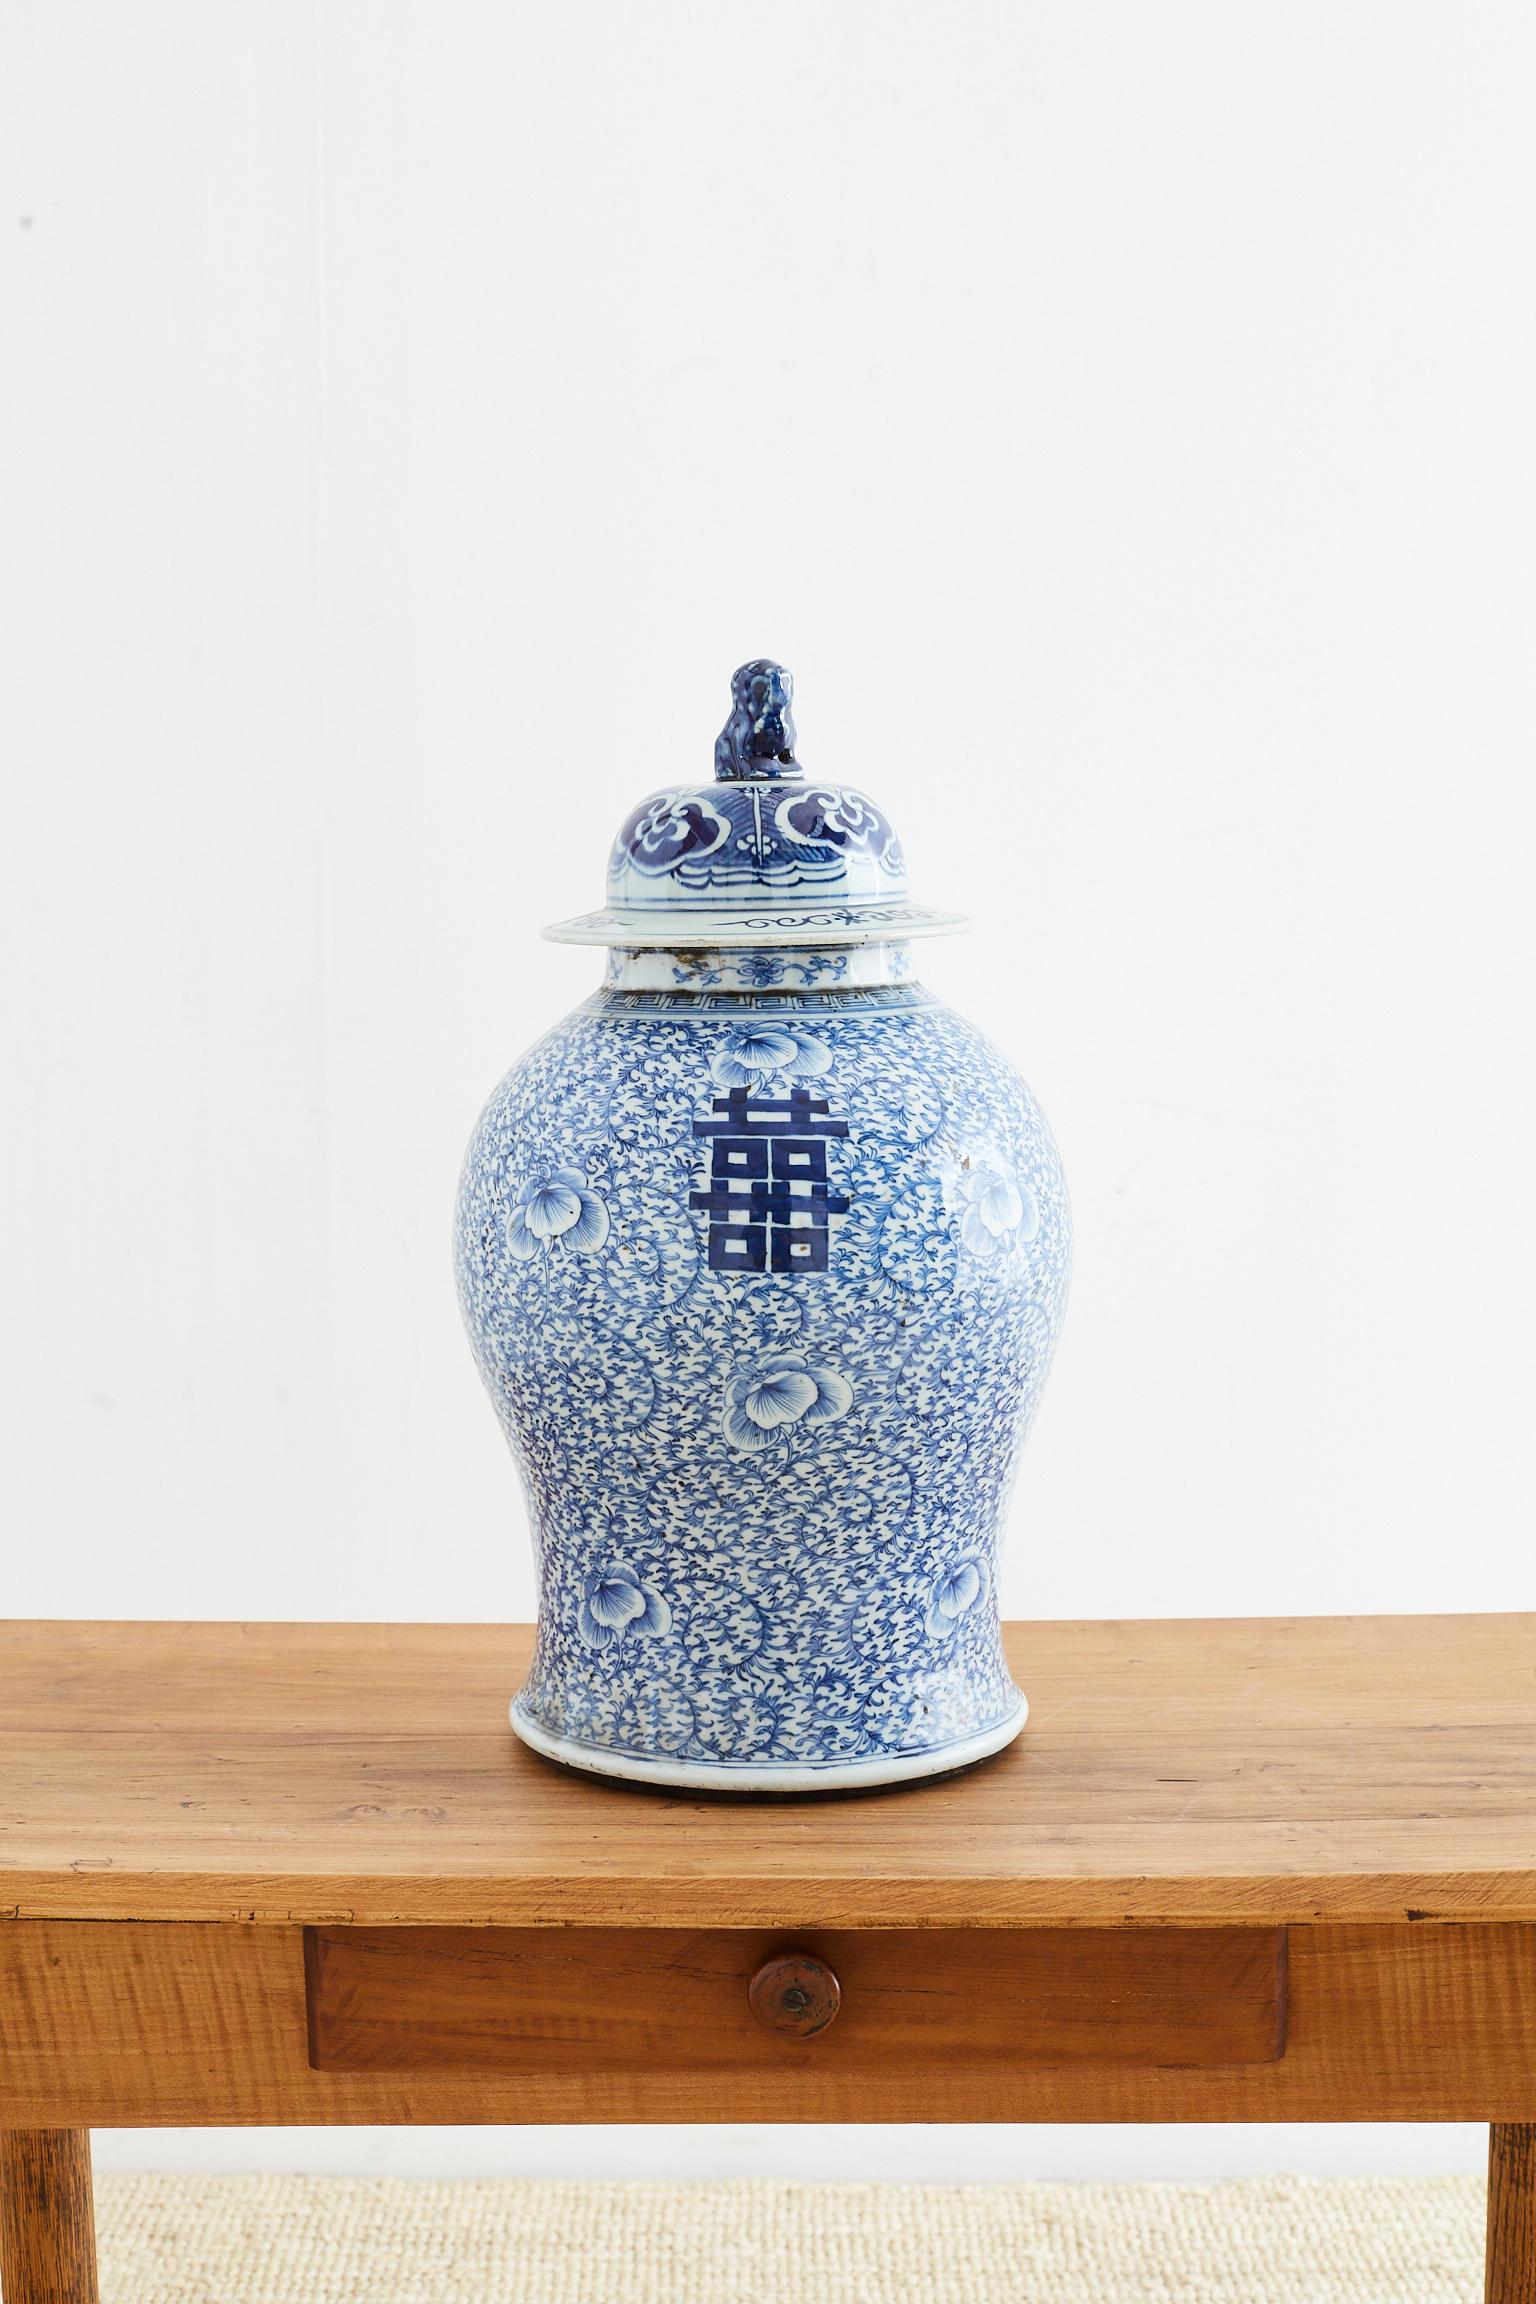 Impressive Chinese late Qing dynasty period blue and white porcelain ginger jar or temple vase. Features a scrolling vine pattern background and double happiness design. Very heavy with a Chengua Ming period mark on bottom, but probably later